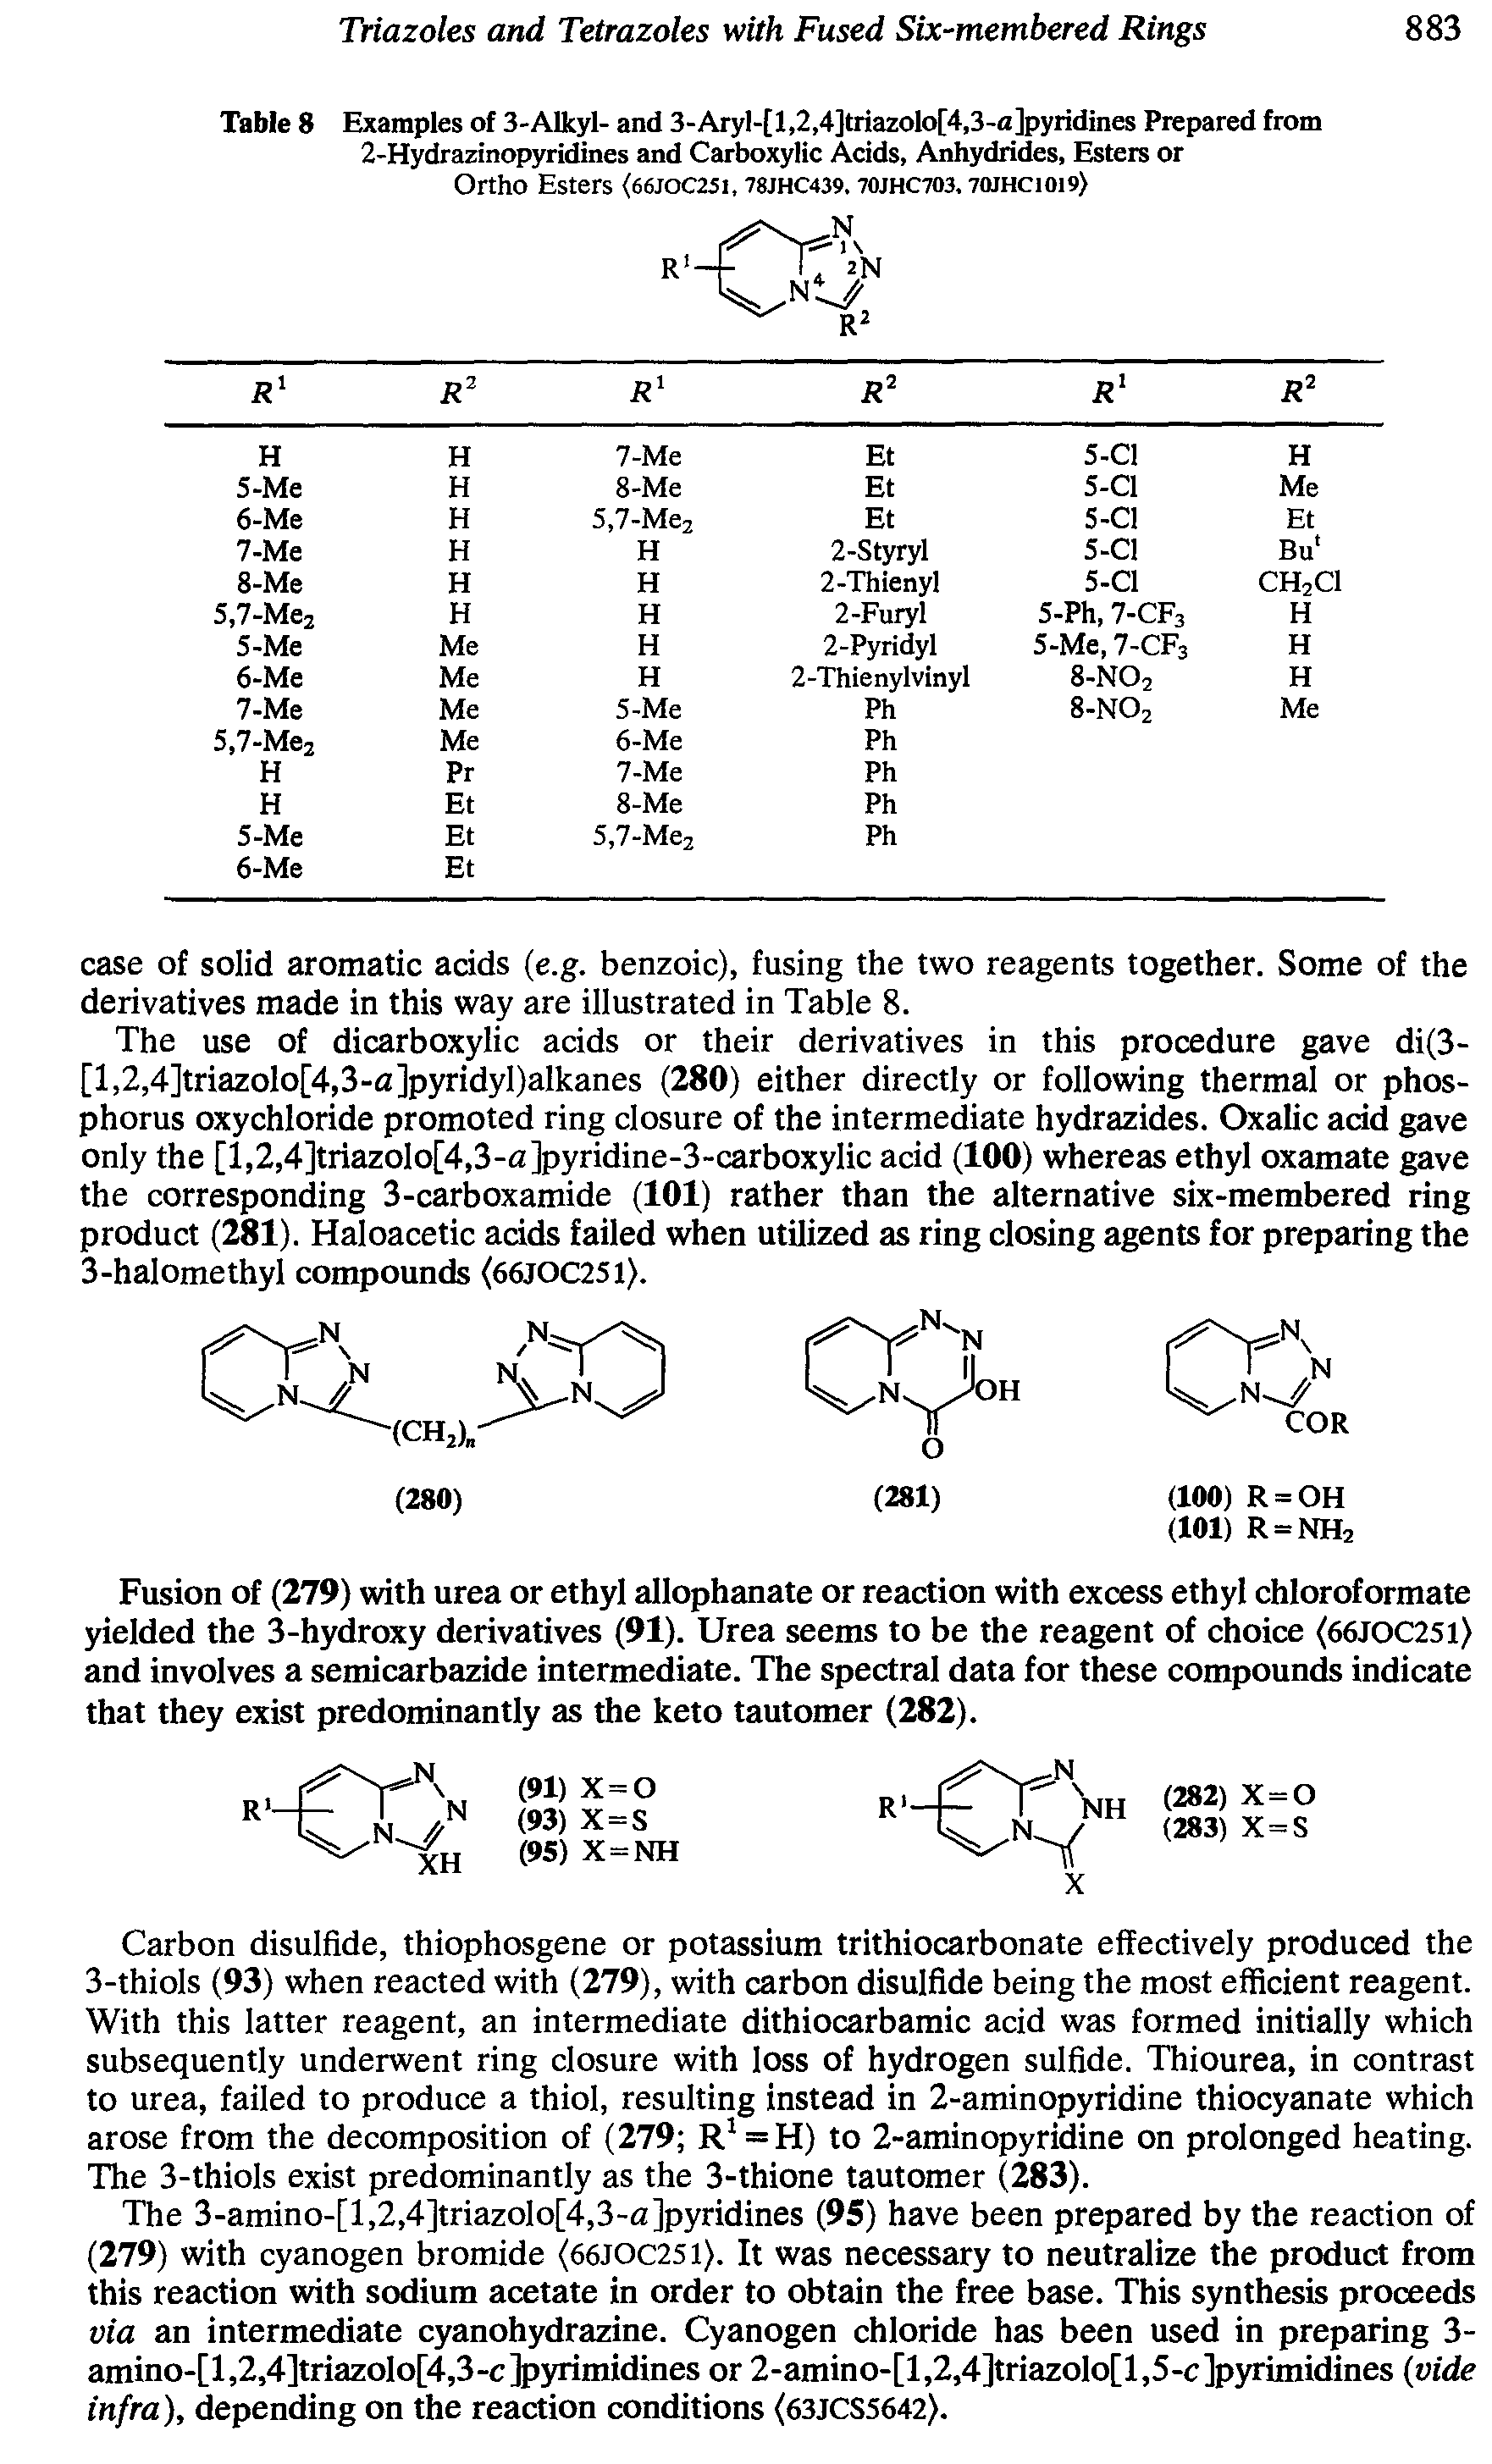 Table 8 Examples of 3-Alkyl- and 3-Aryl-[l,2,4]triazolo[4,3-a]pyridines Prepared from 2-Hydrazinopyridines and Carboxylic Acids, Anhydrides, Esters or Ortho Esters <66JOC25i, 78JHC439.7OJHC703,70JHC1019)...